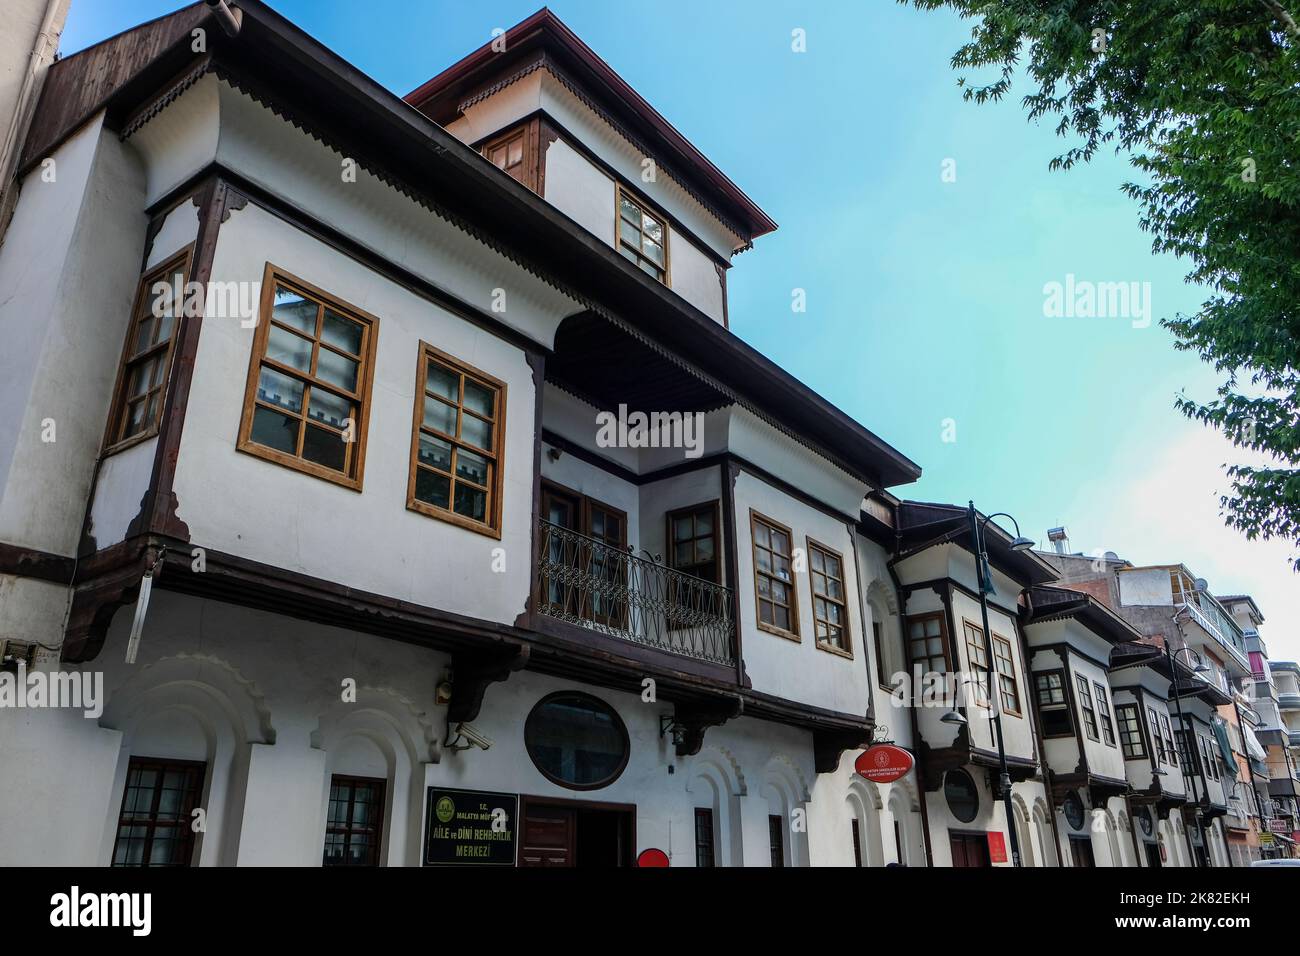 Beşkonaklar is one of the original examples of Malatya's traditional civil architectural structures that have survived to the present day. One of the Stock Photo